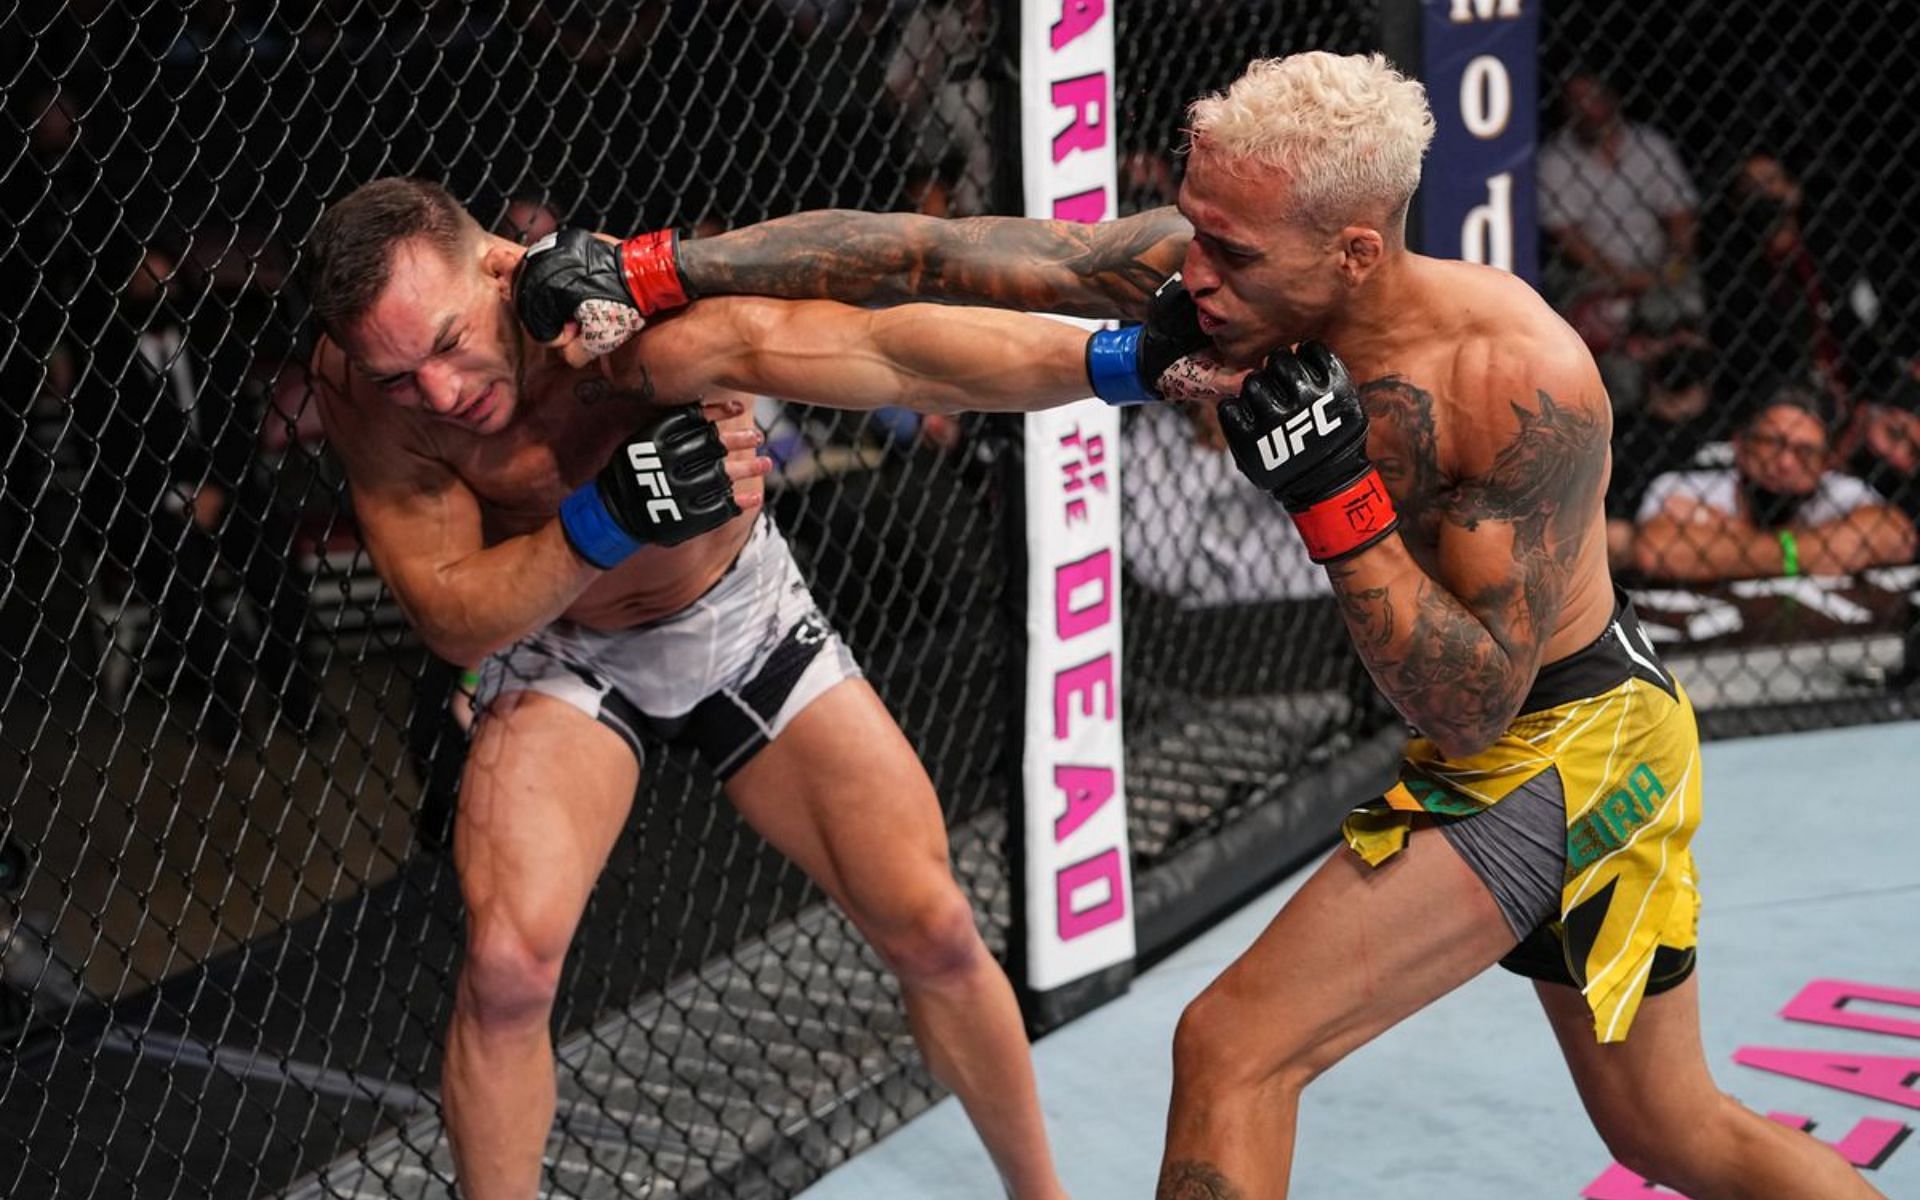 Charles Oliveira snatched victory from the jaws of defeat against Michael Chandler at UFC 262